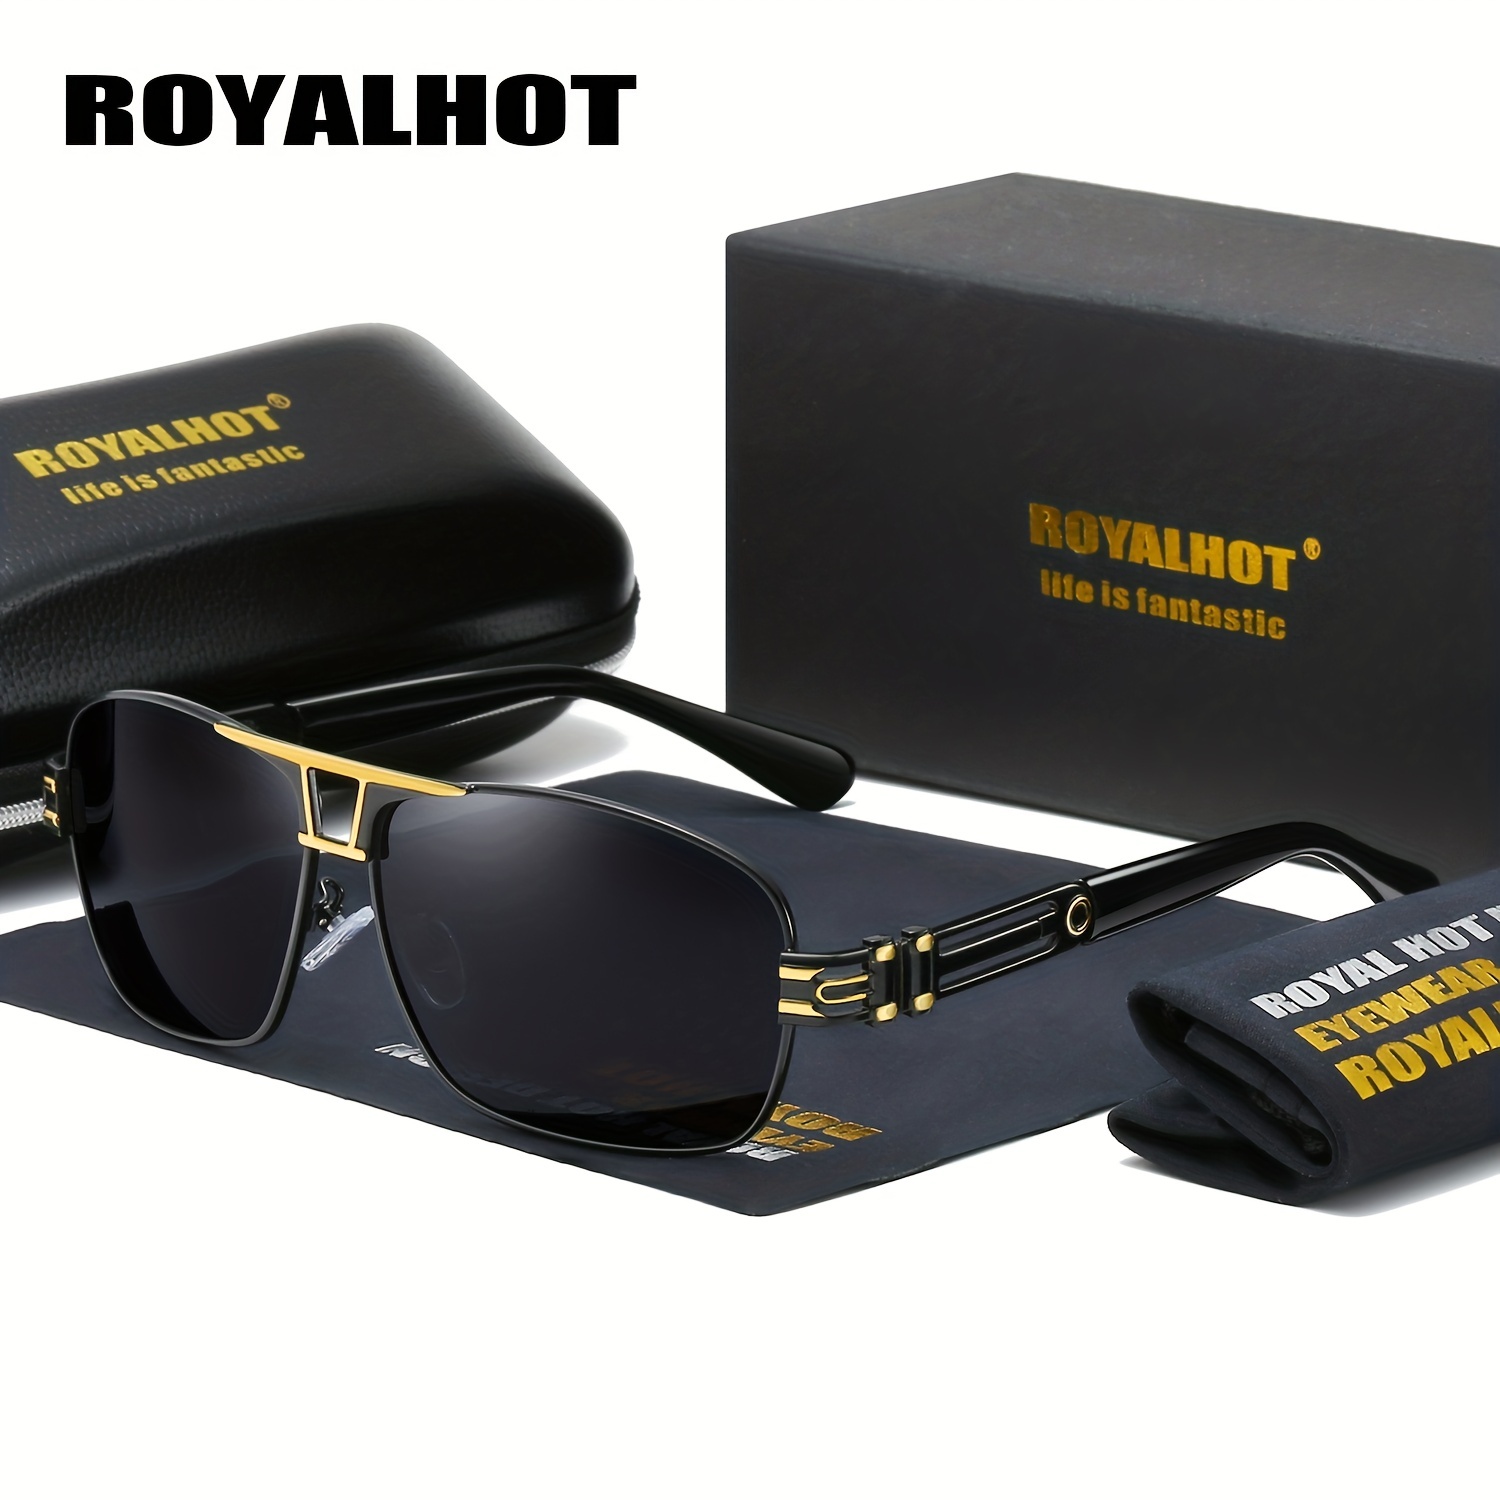 Sport Sunglasses for Men Polarized Square Mirror Shades UV400 Driving  Safety Sun Glasses With Free Box